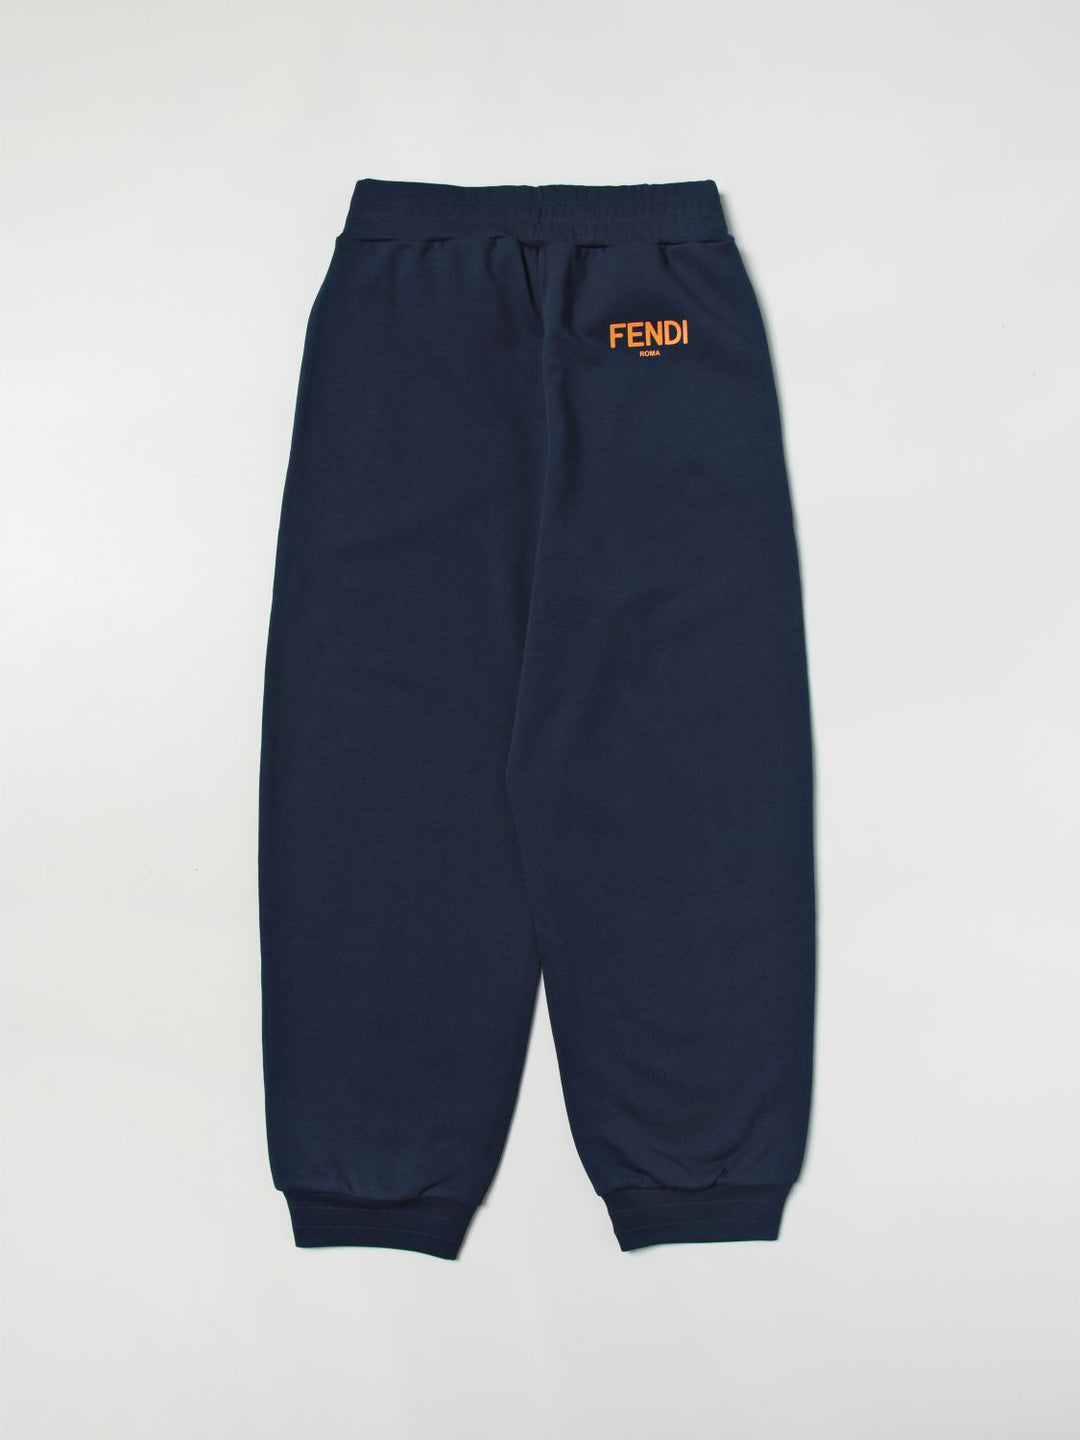 Navy blue trousers for boys with logo